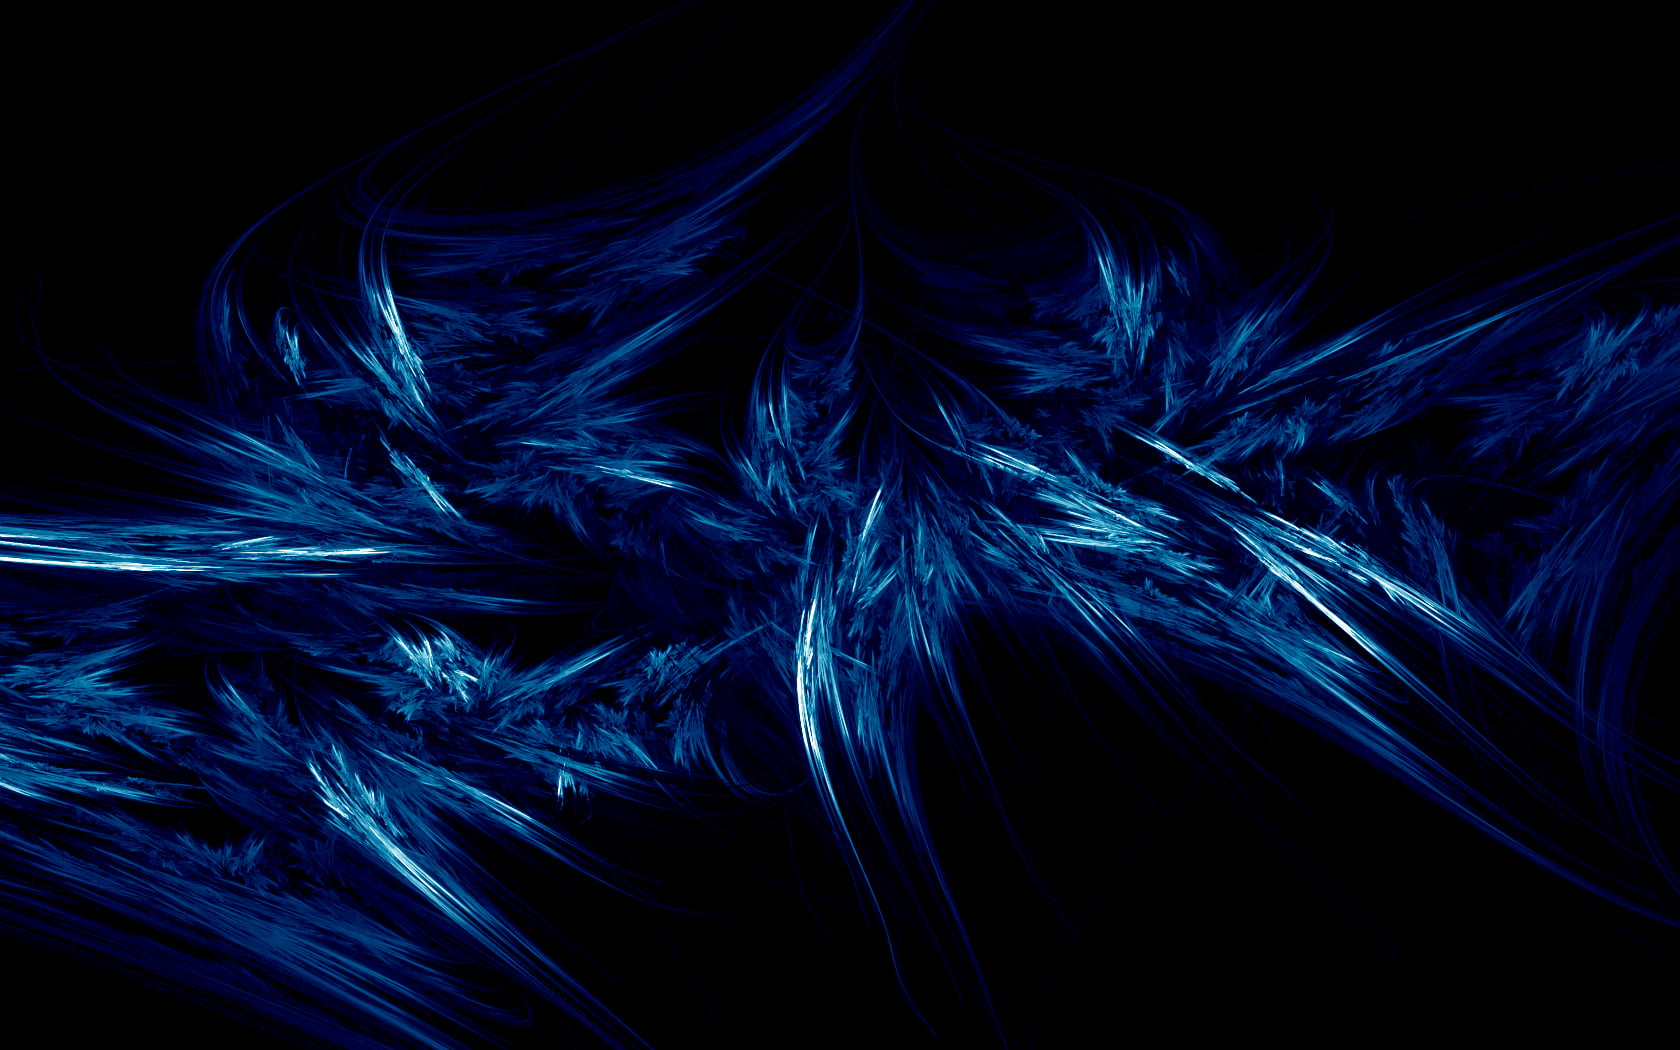 Blue and black abstract painting, digital art, black background